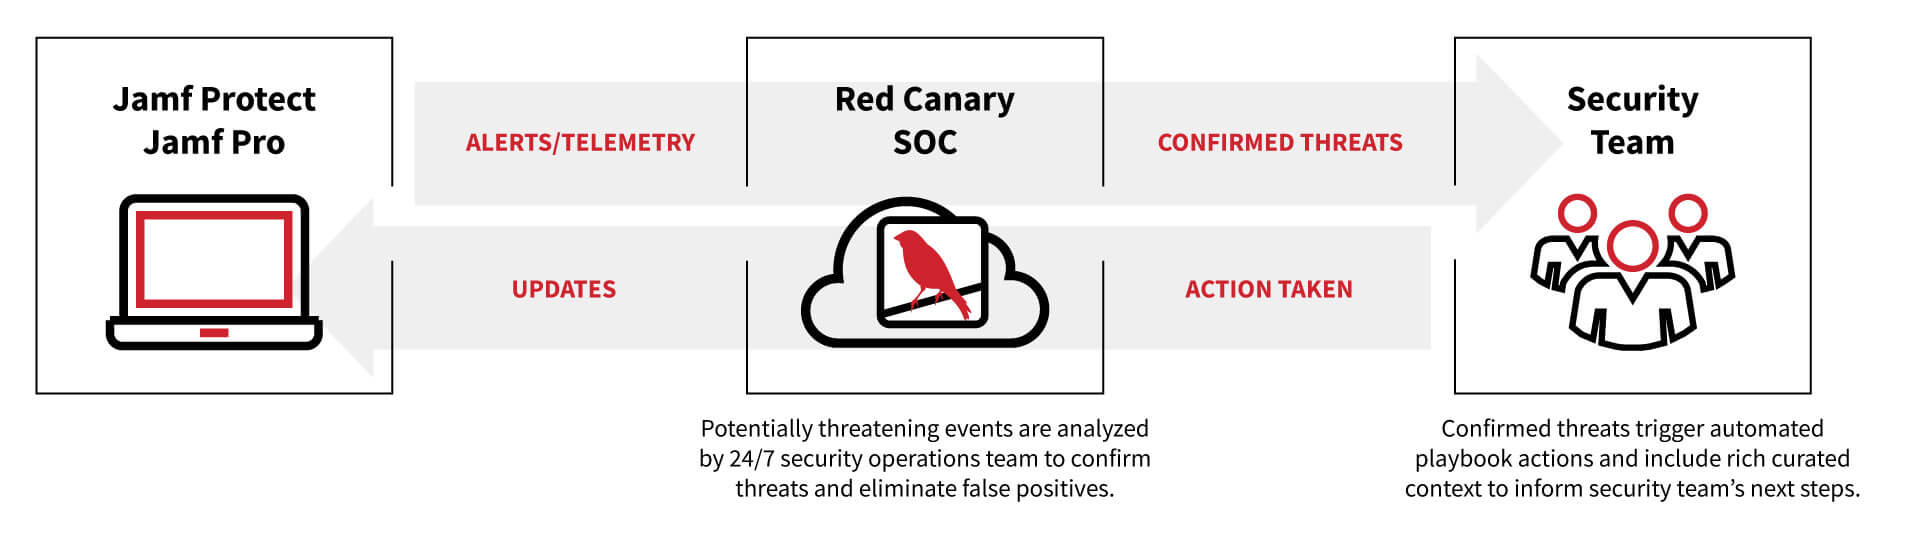 Diagram showing how Red Canary sends updates to Jamf based on detected threats